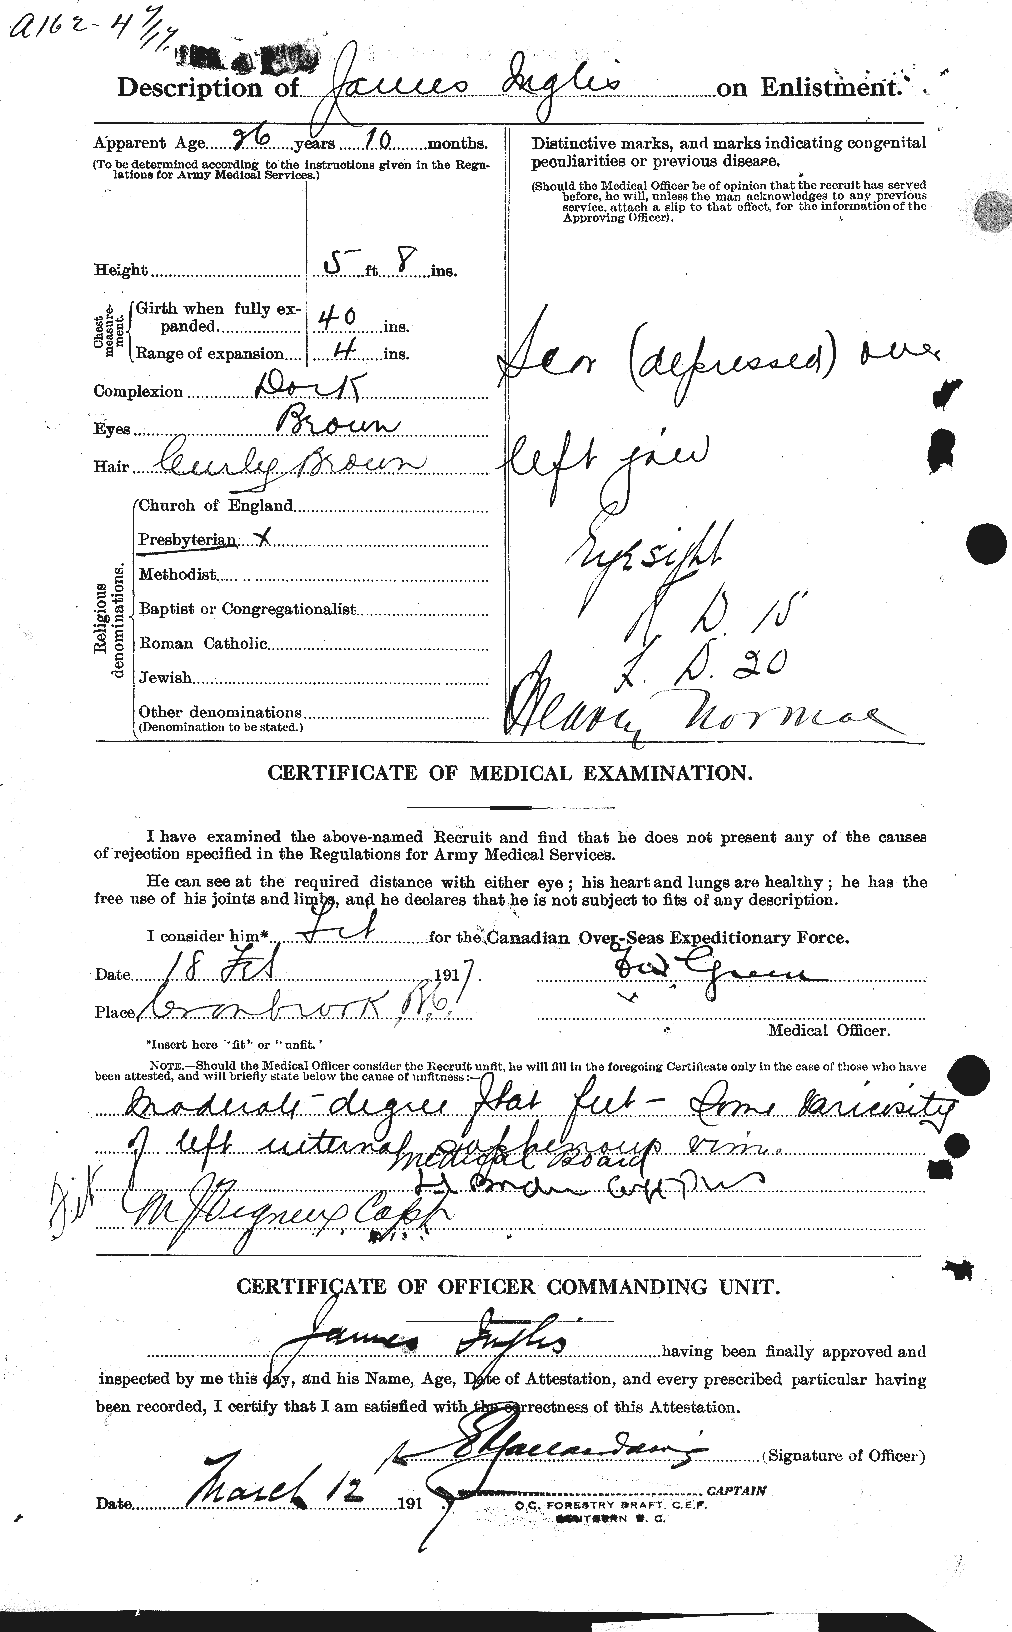 Personnel Records of the First World War - CEF 410251b